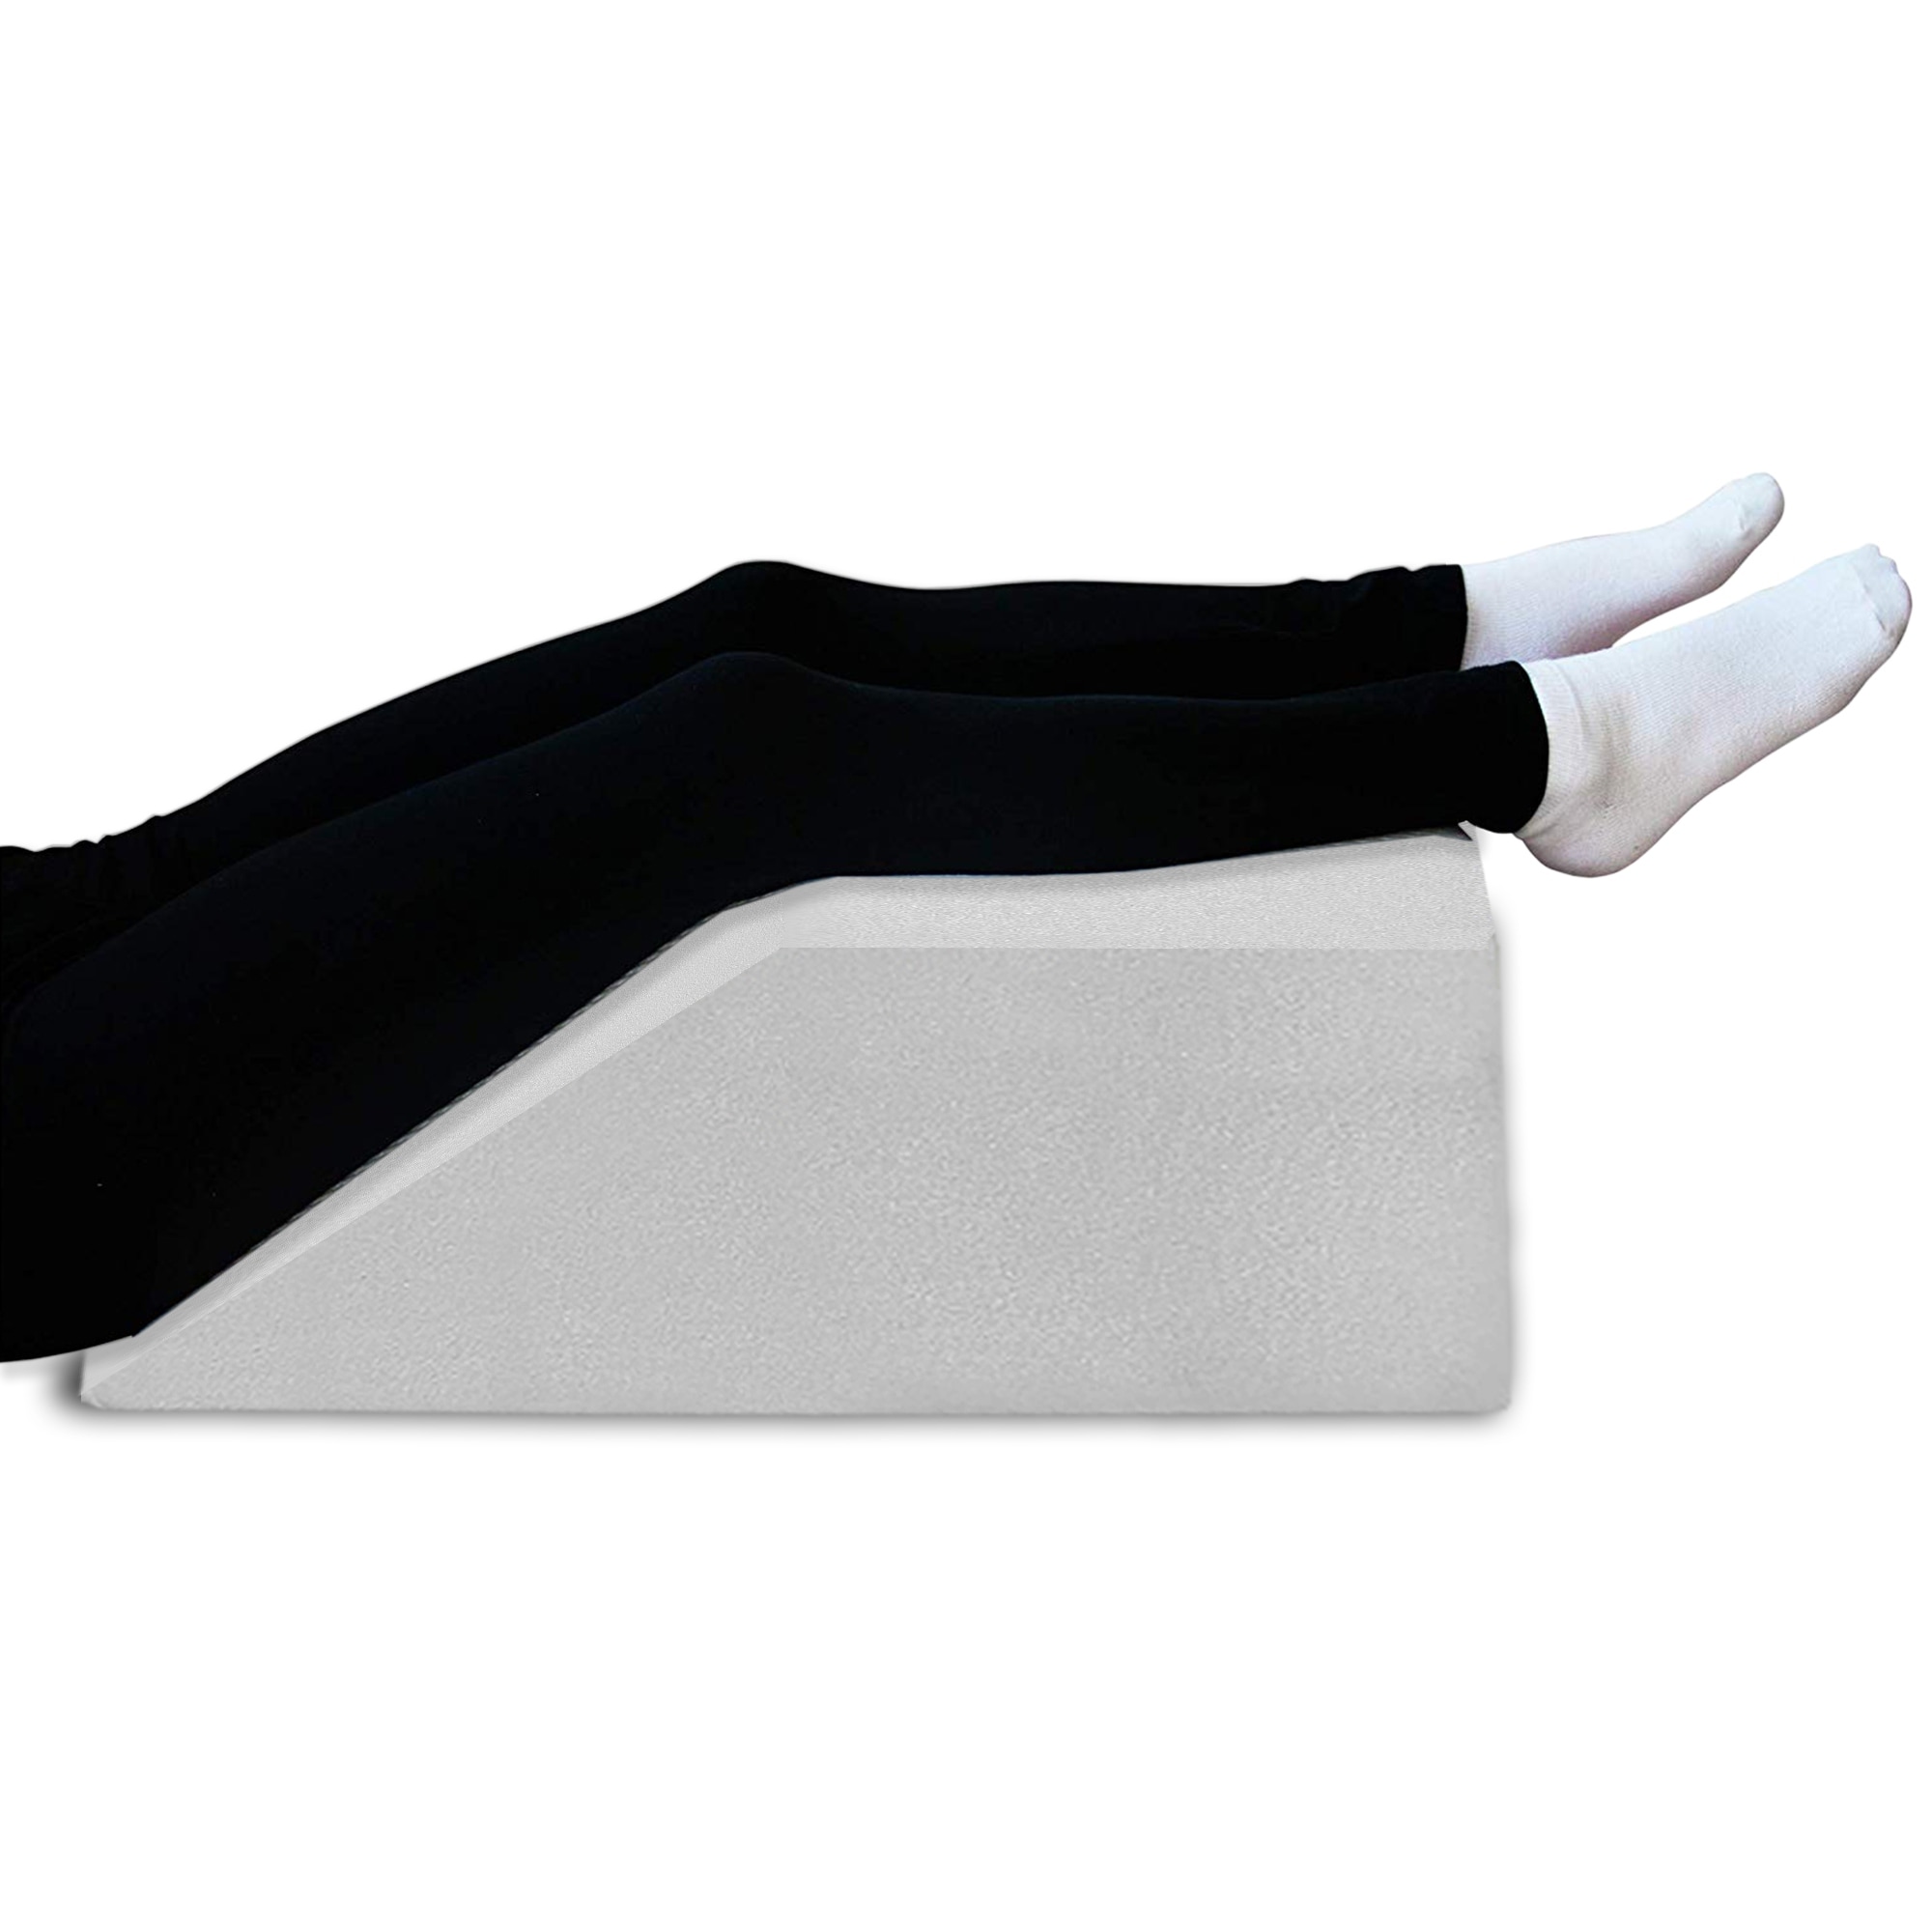 https://ak1.ostkcdn.com/images/products/is/images/direct/9510f410a721dcd430f3166d814ef86ab61196fa/Leg-Pillow---Full-Foam-Top%2C-Leg-Rest-Elevating-Foam-Wedge--Relieves-and-Recovers-Foot-and-Ankle-Injury%2C-Leg-Pain%2C-White.jpg